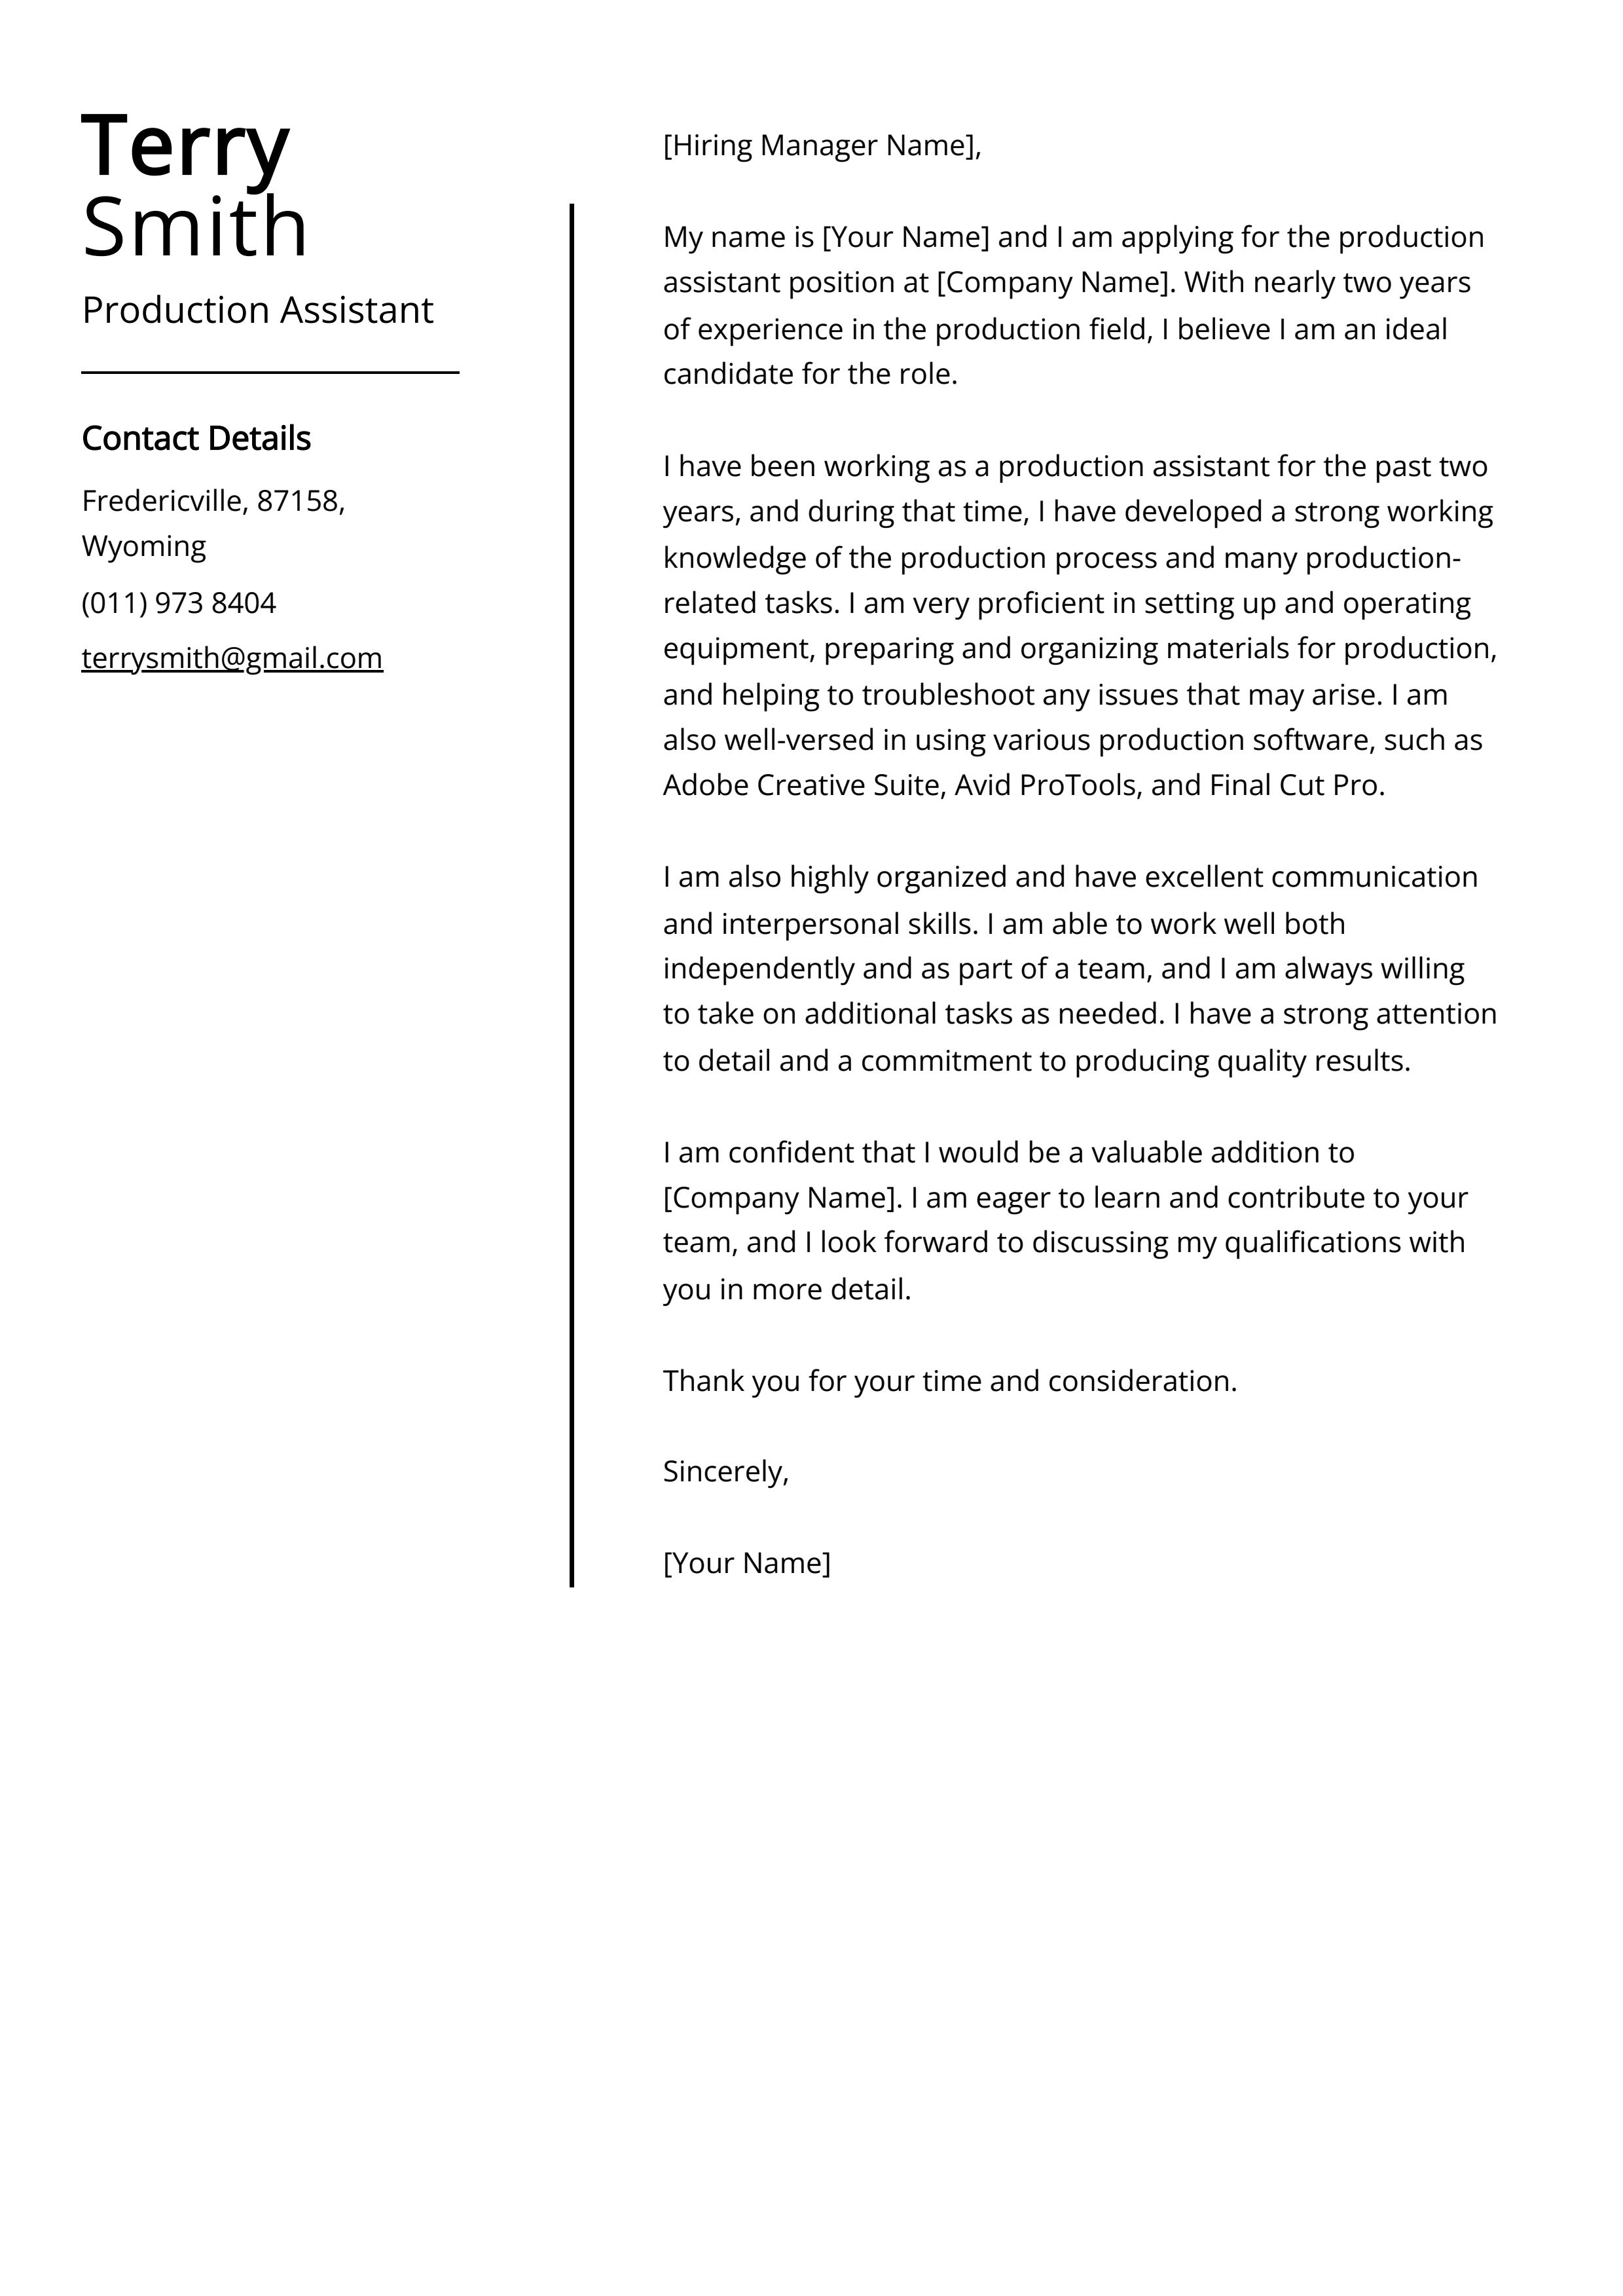 Production Assistant Cover Letter Example